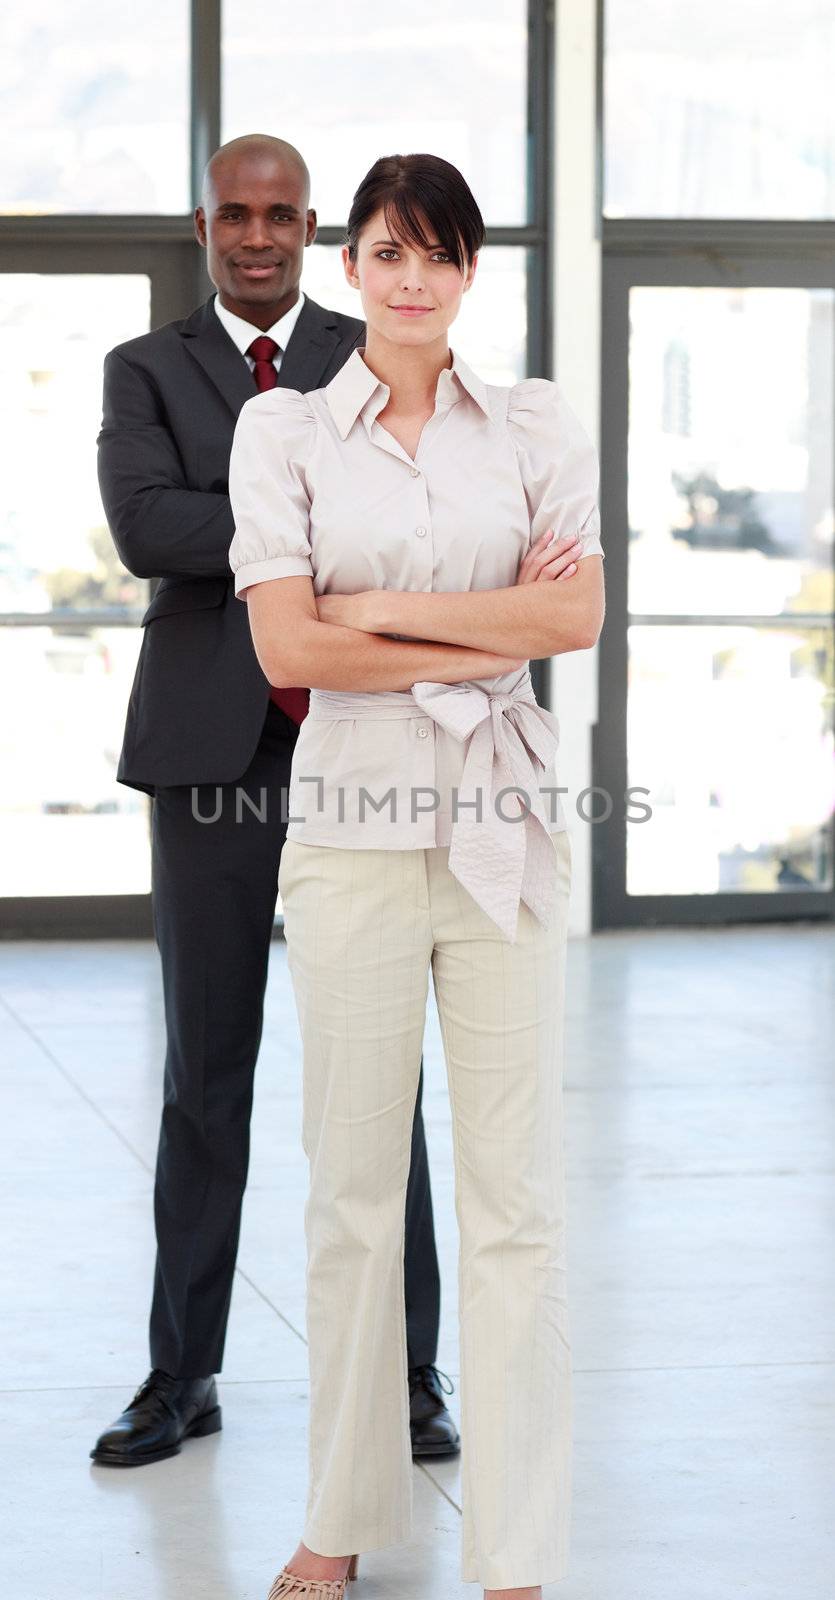 Businessman and businesswoman with folded arms looking at the camera